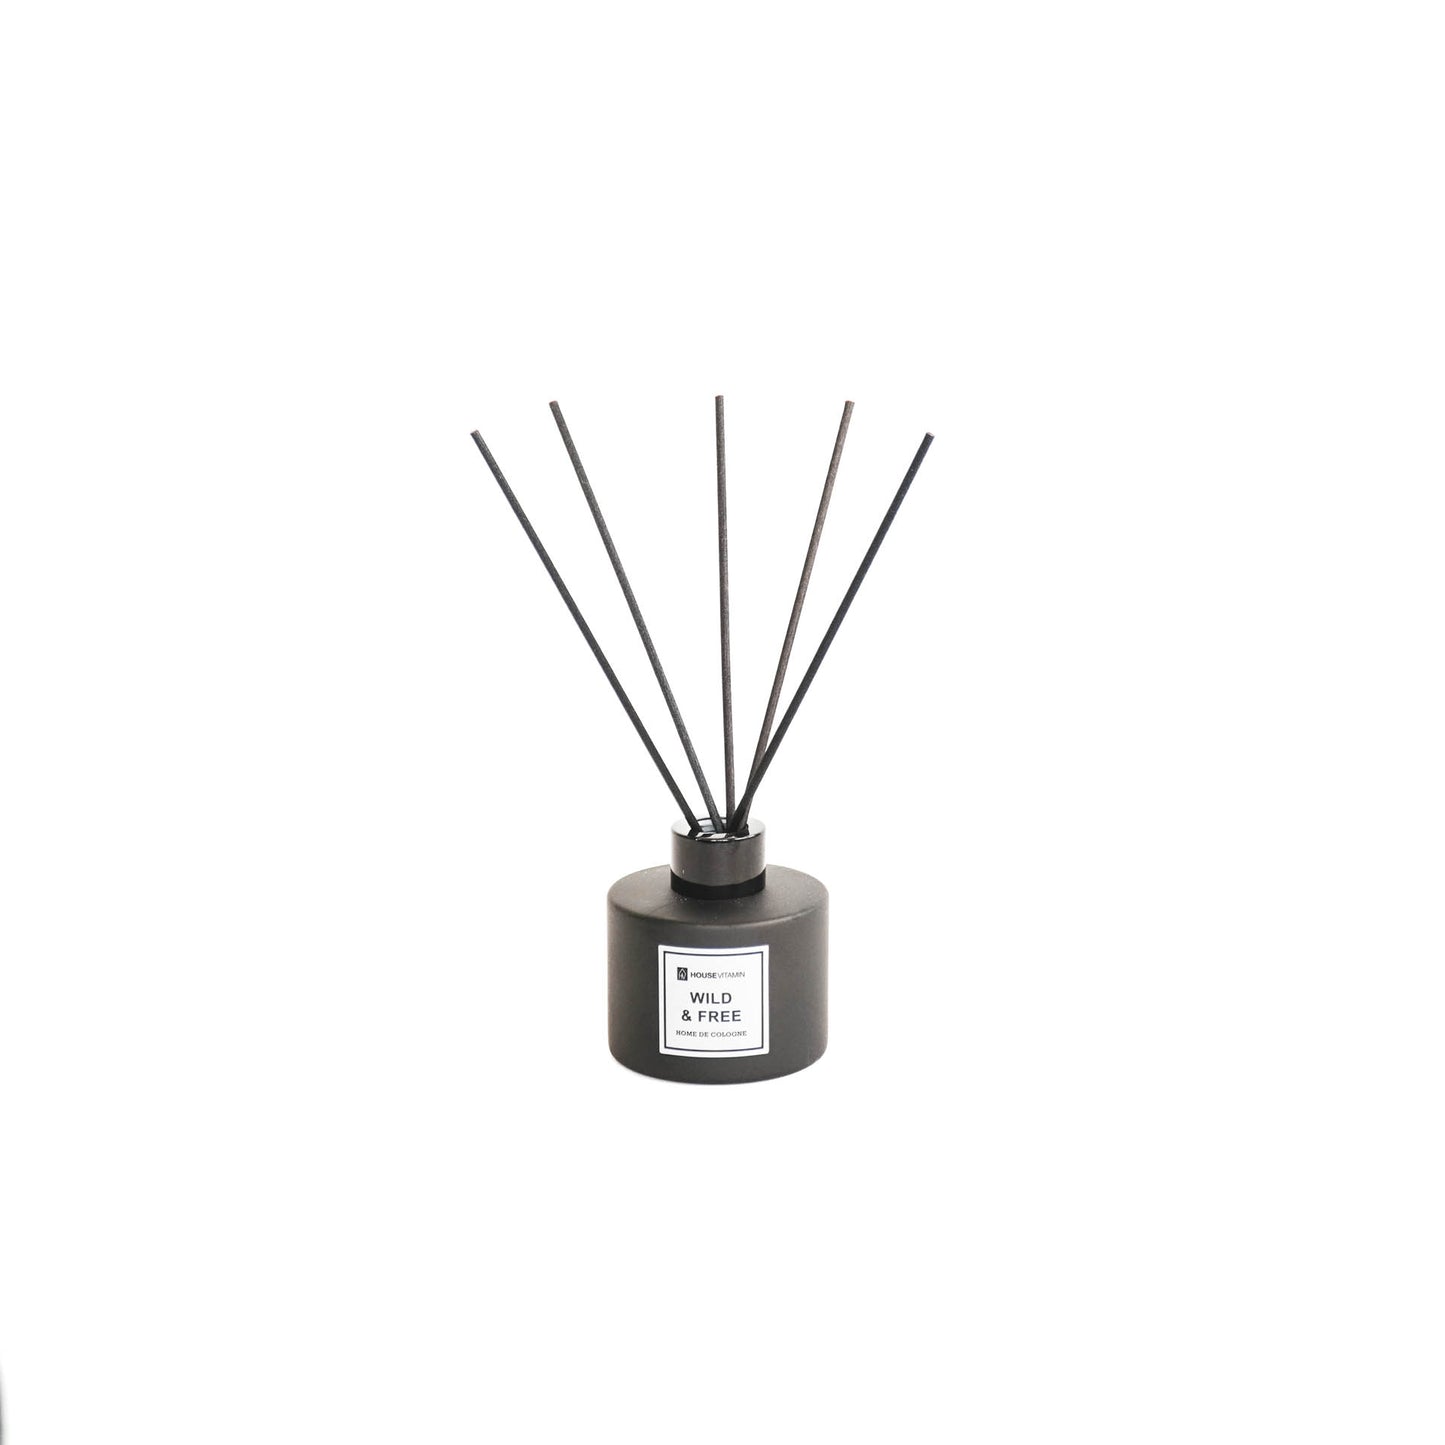 HV Home de Cologne Reed Diffusers - 100 ml - Wild and free